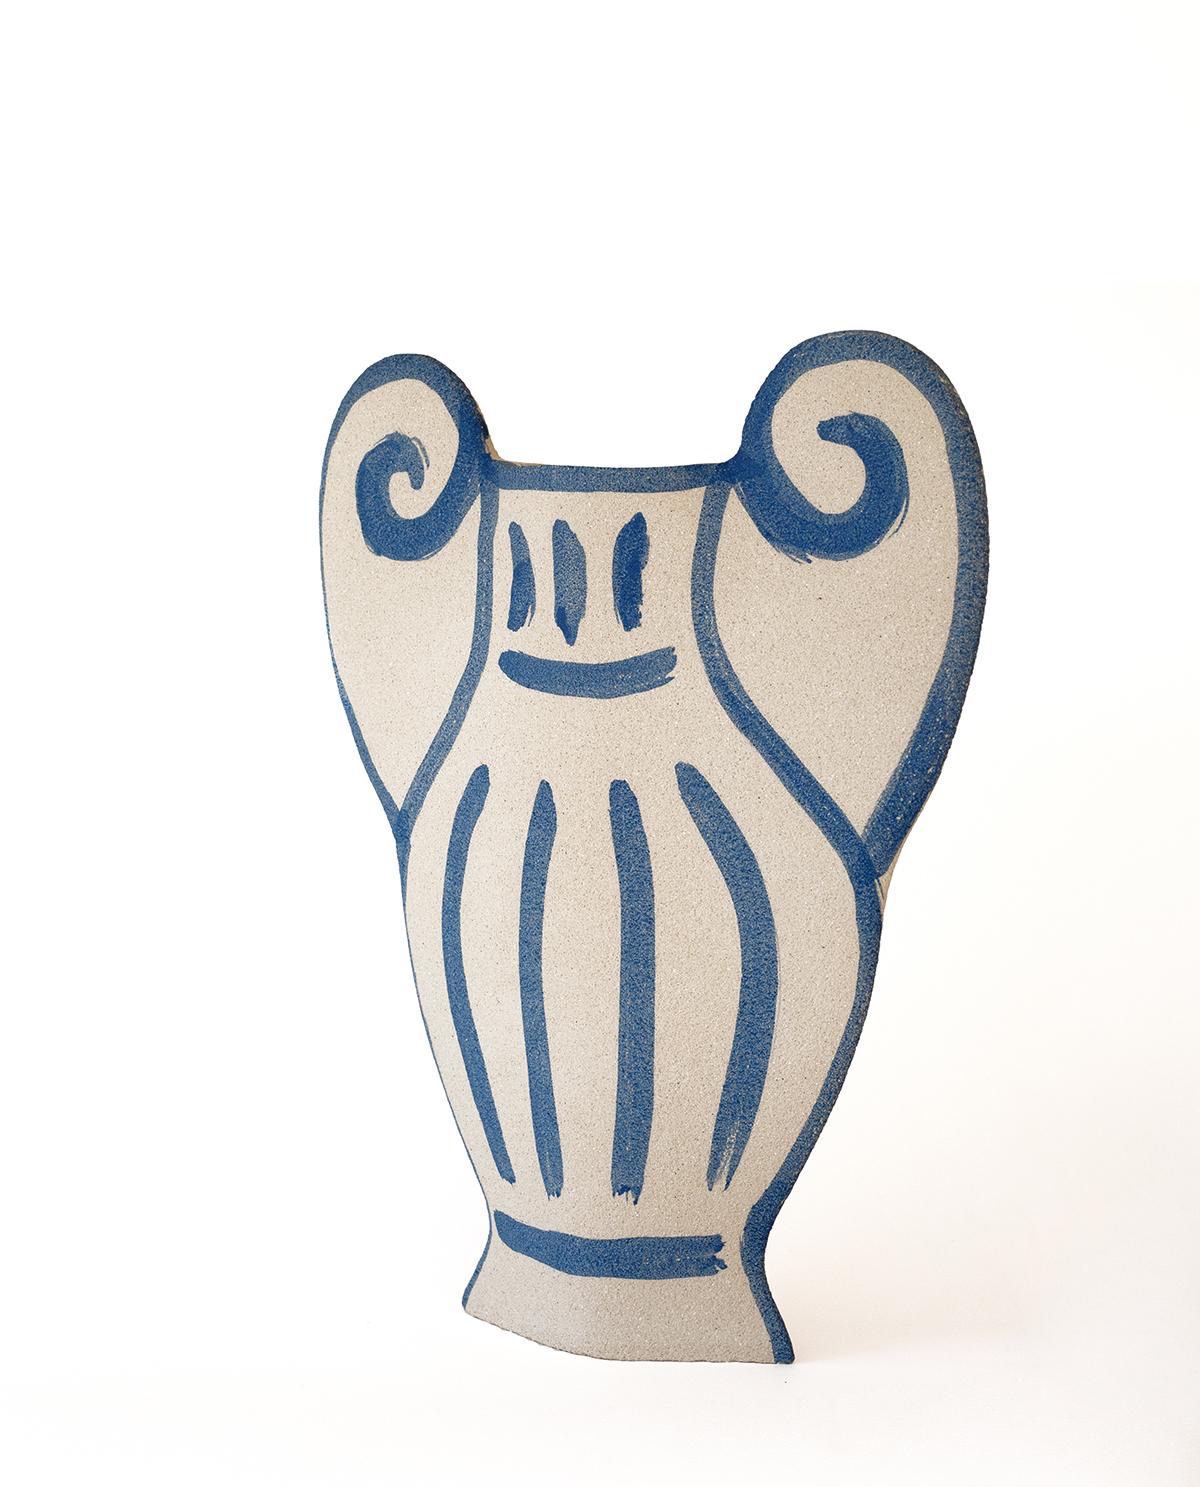 A part of a captivating new line blending ancient Greek pottery with contemporary design, the ‘Greek Krater’ vase showcases delicate blue underglaze illustrations that harmonize traditional and modern aesthetics.
Crafted by our designer, the blue